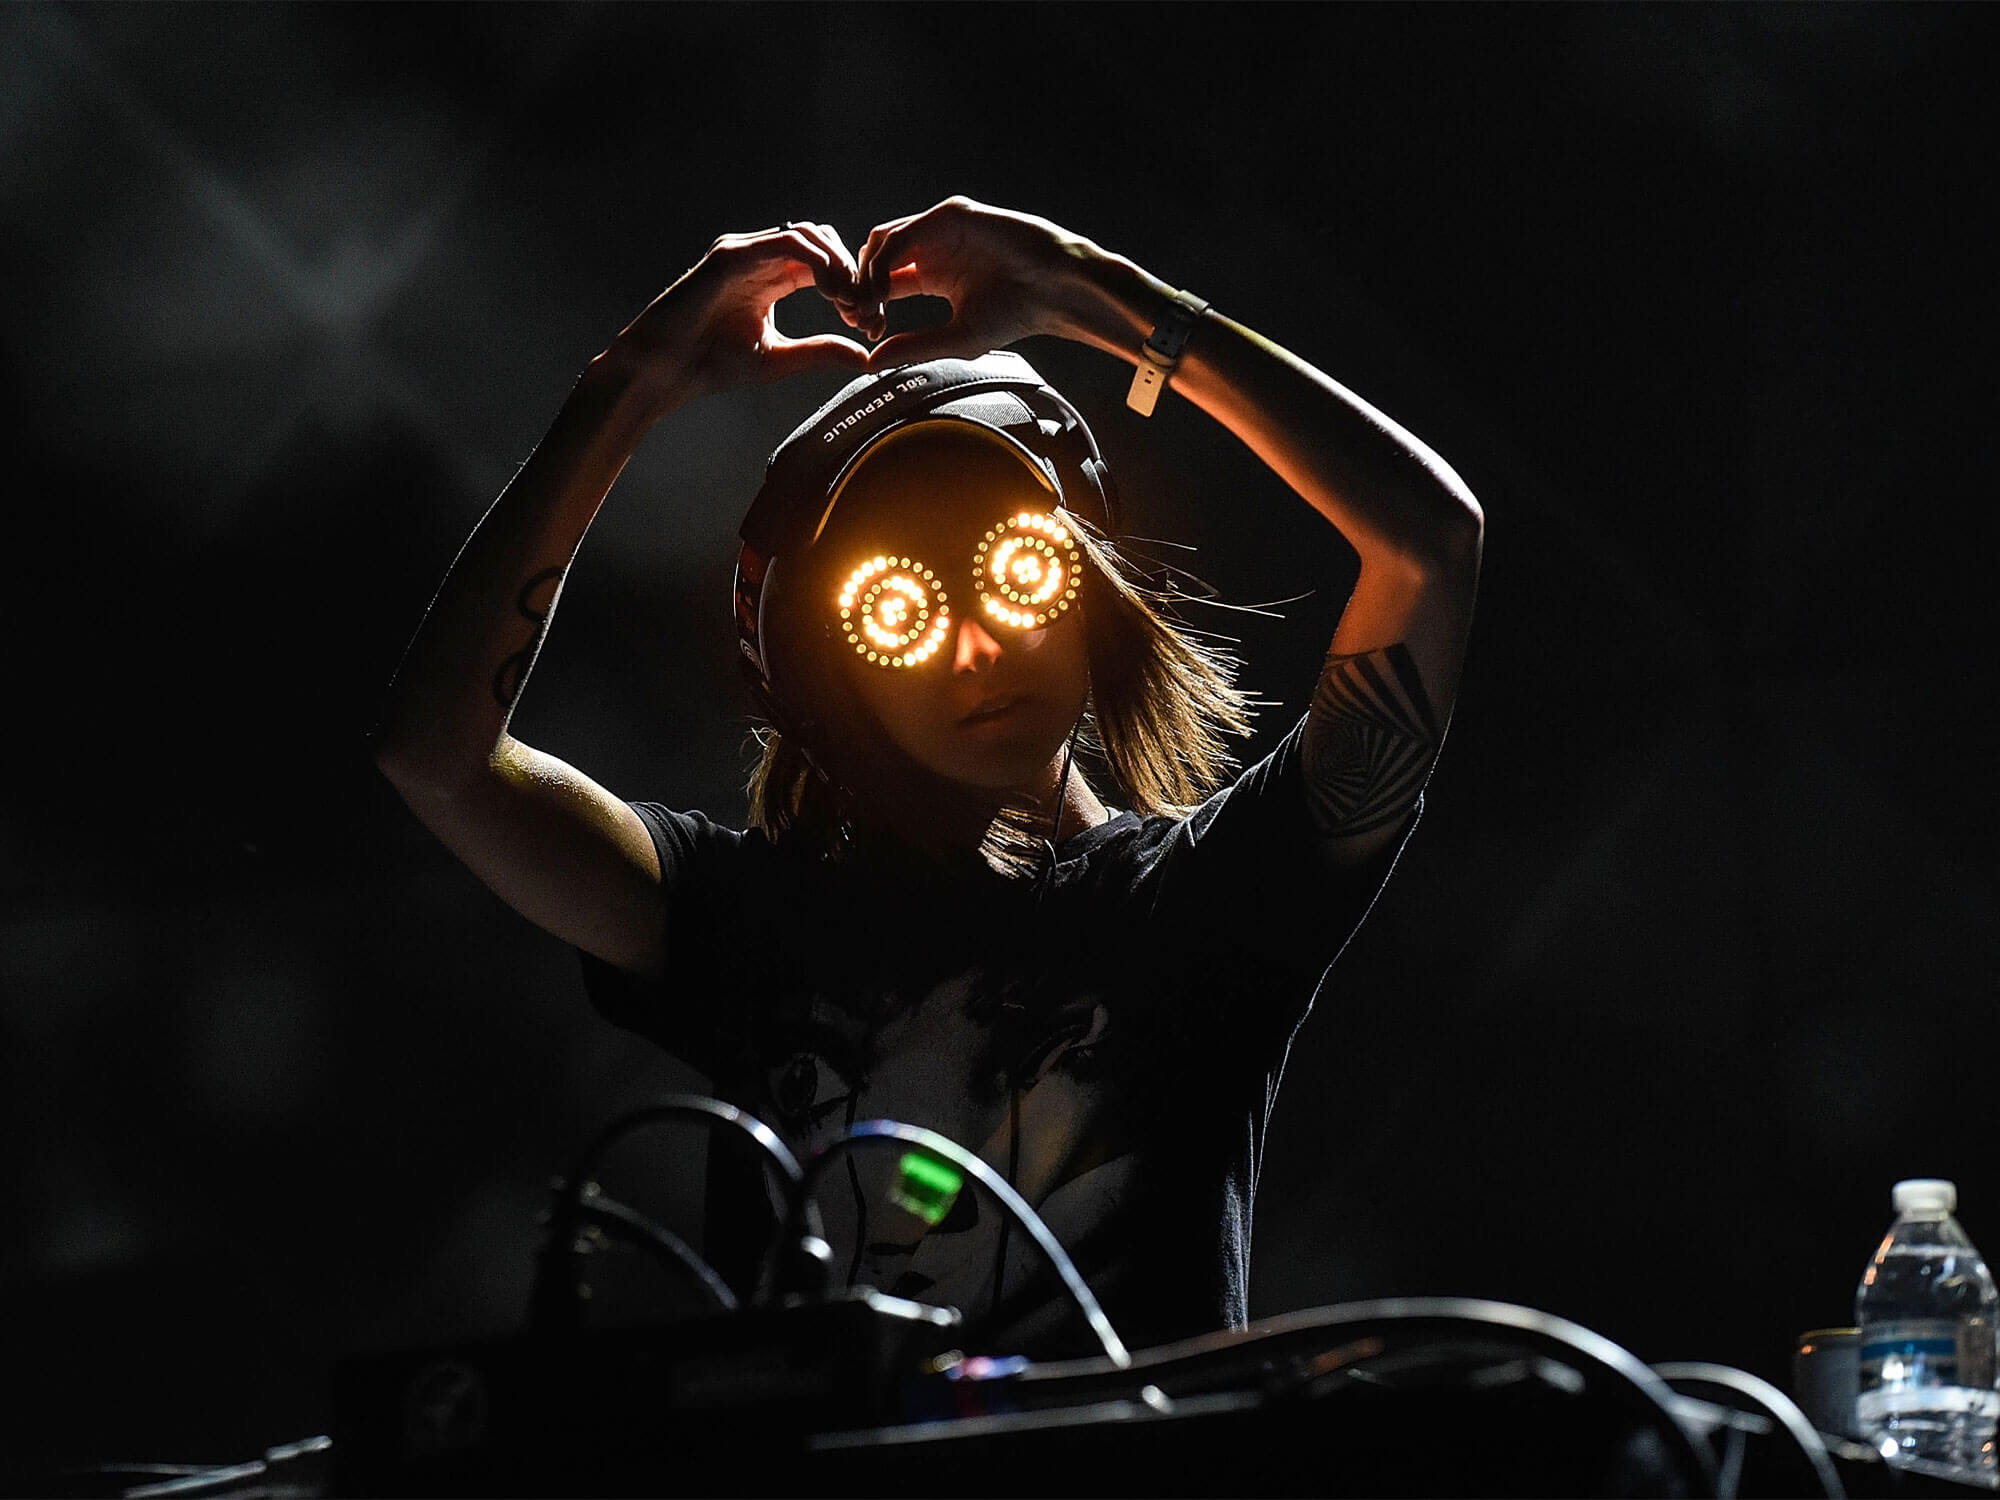 REZZ onstage at Brooklyn Mirage on June 21, 2019